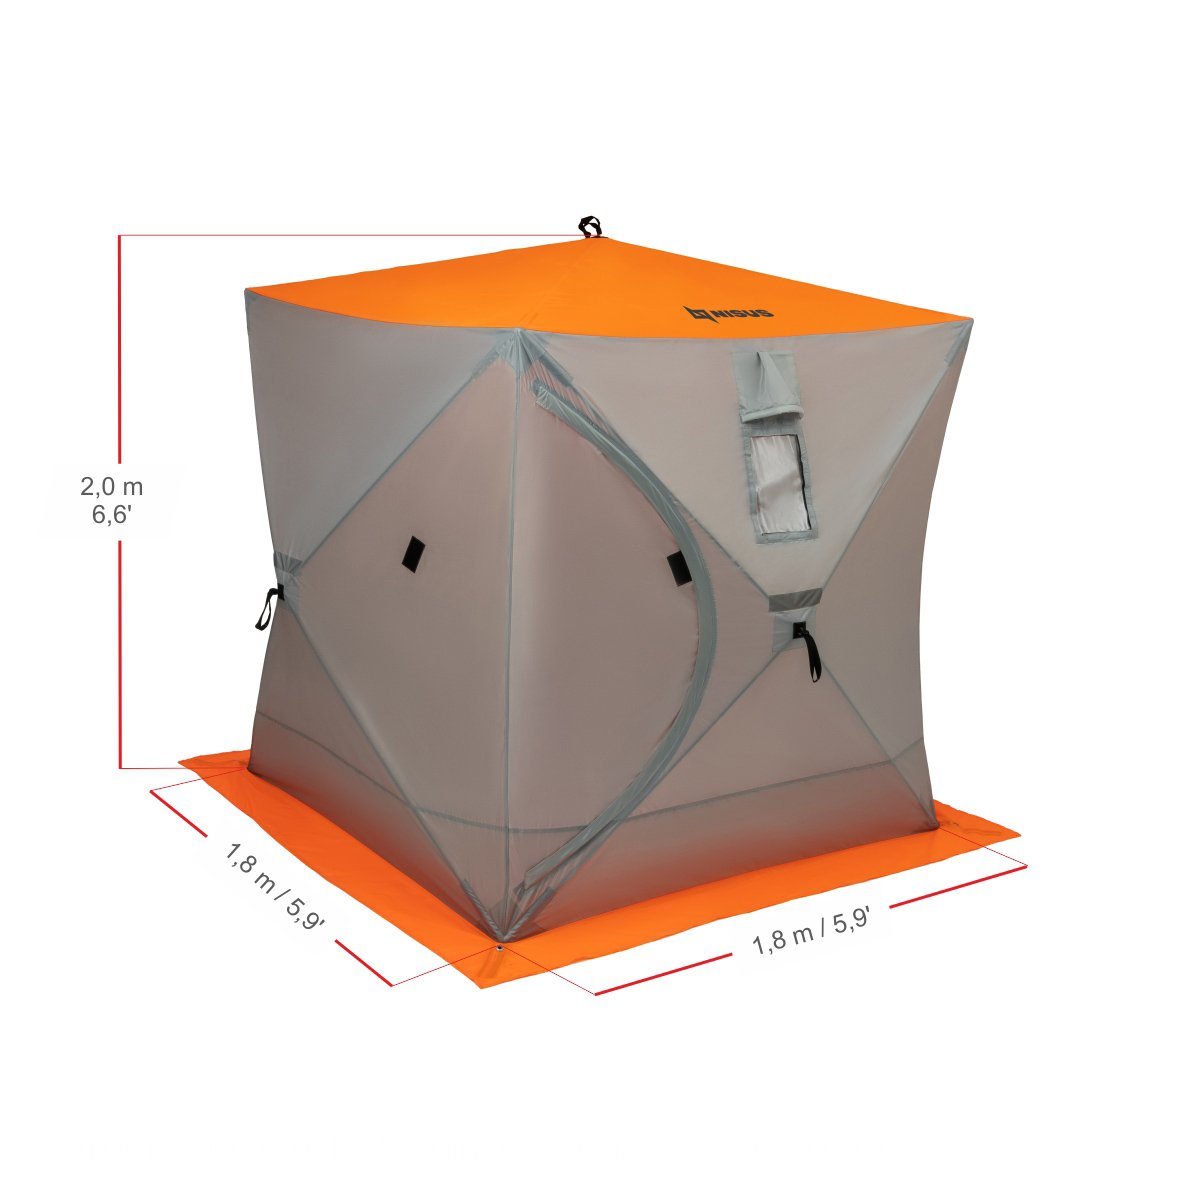 Cube Large Pop-Up Ice Fishing Shelter for 3 Persons is 6.6 feet high, 5,9 feet long and 5.9 feet wide